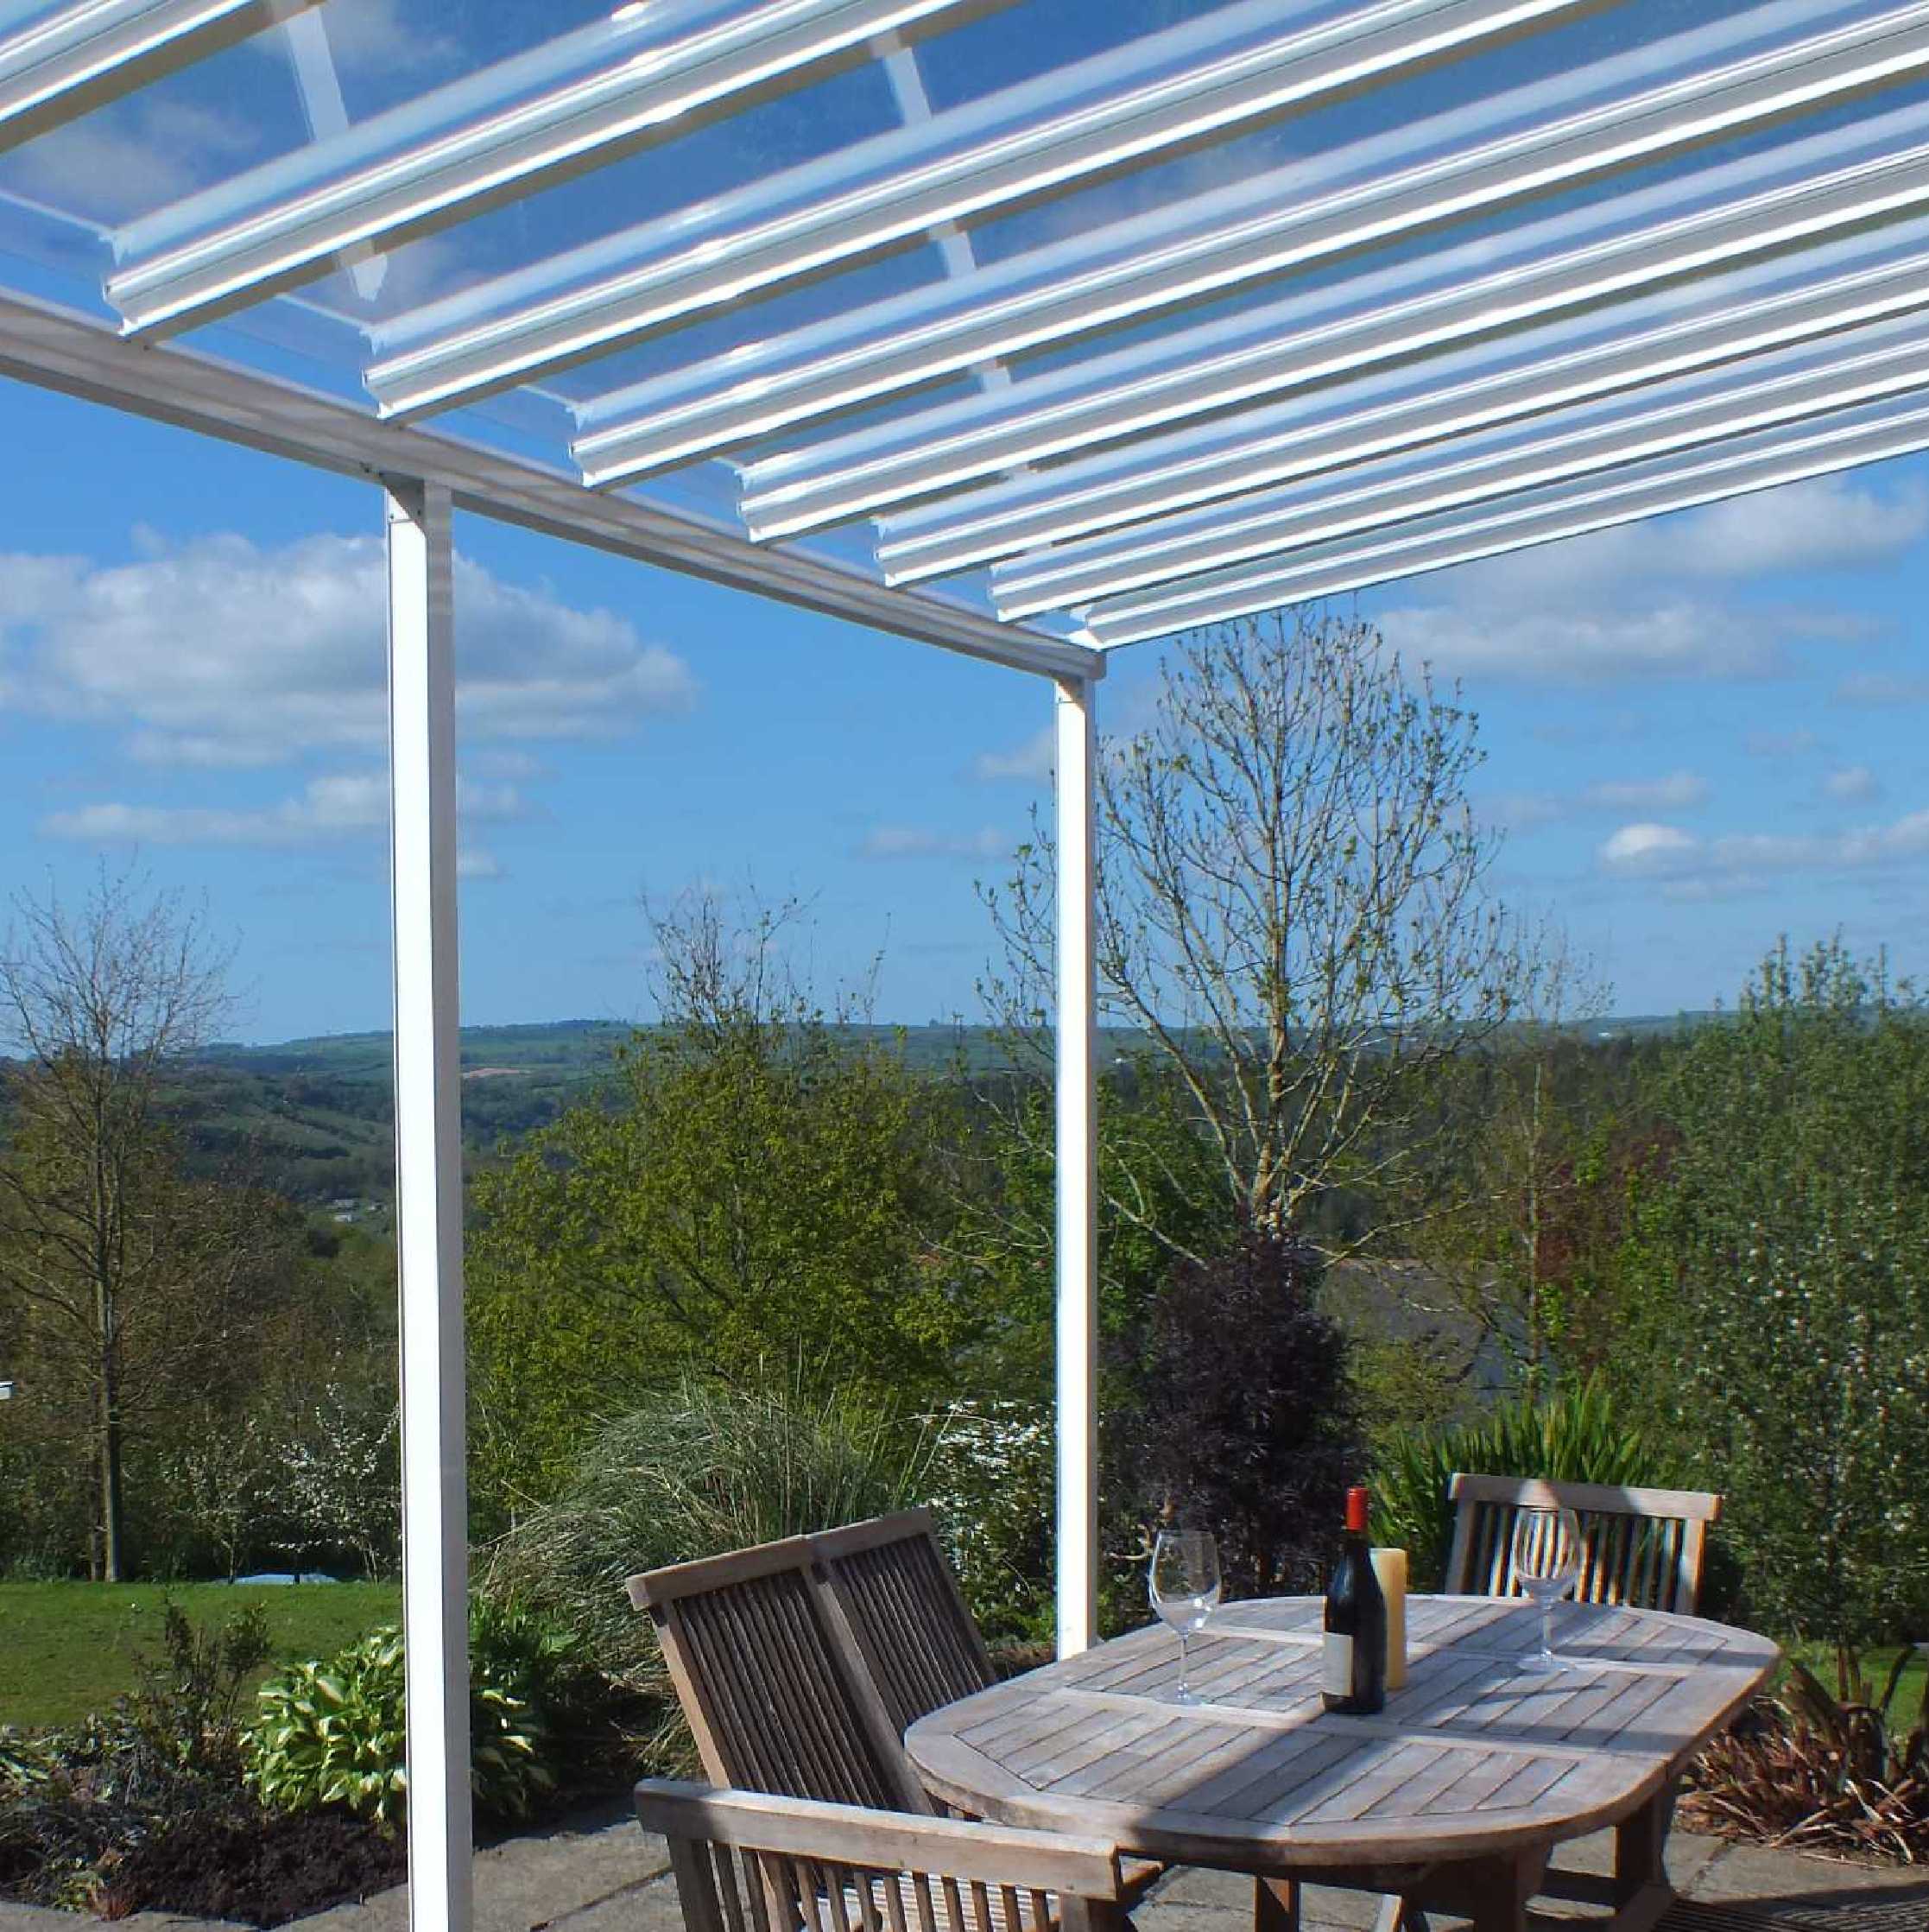 Buy Omega Smart Lean-To Canopy, White with 6mm Glass Clear Plate Polycarbonate Glazing - 10.5m (W) x 1.5m (P), (5) Supporting Posts online today